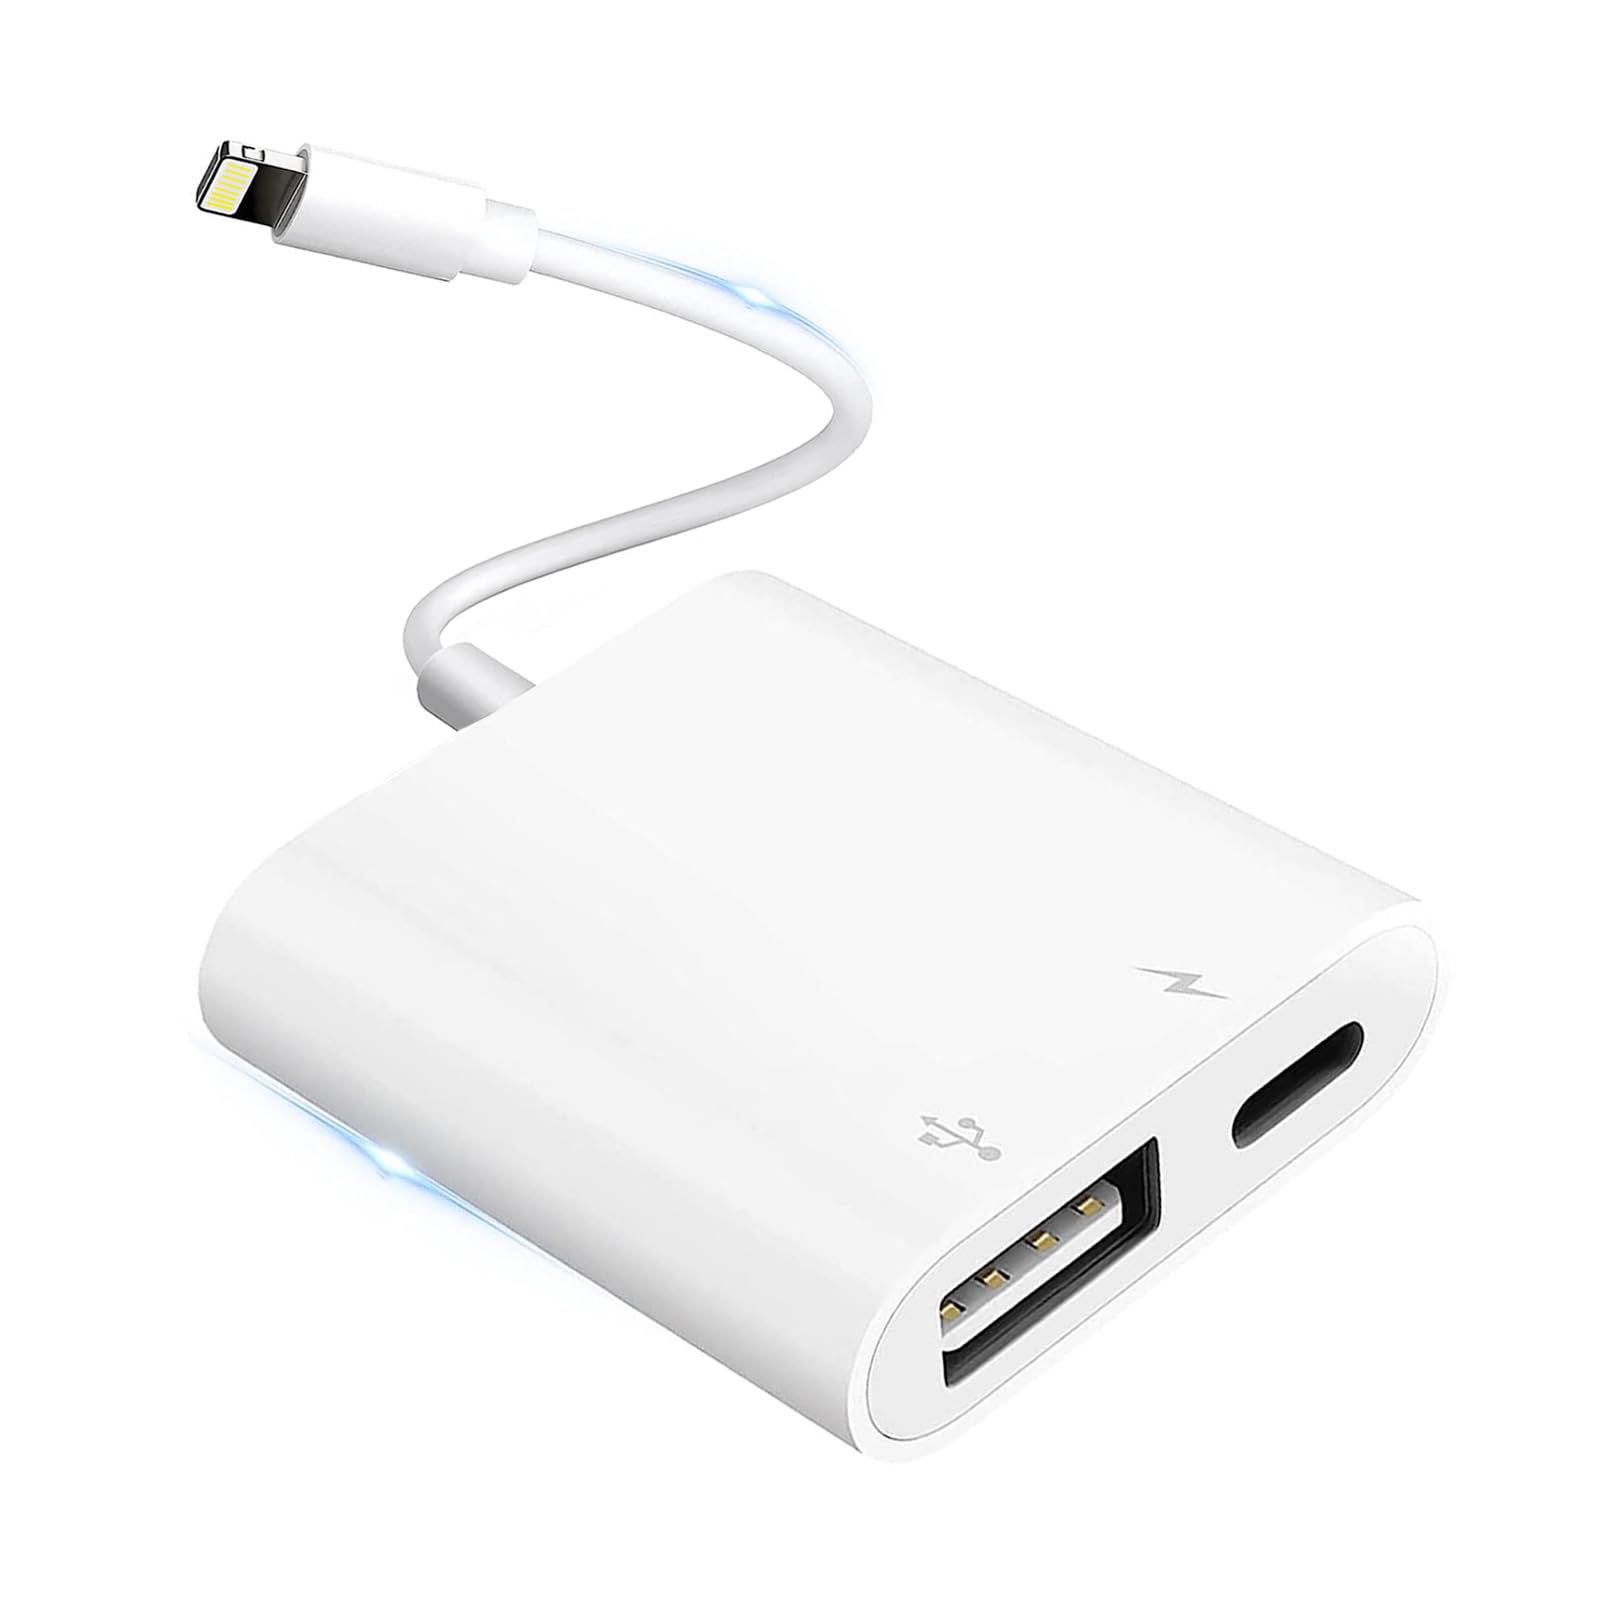 Ensure that the iPhone is properly connected to the computer via USB cable.
If using a USB hub, try connecting the iPhone directly to a USB port on the computer.